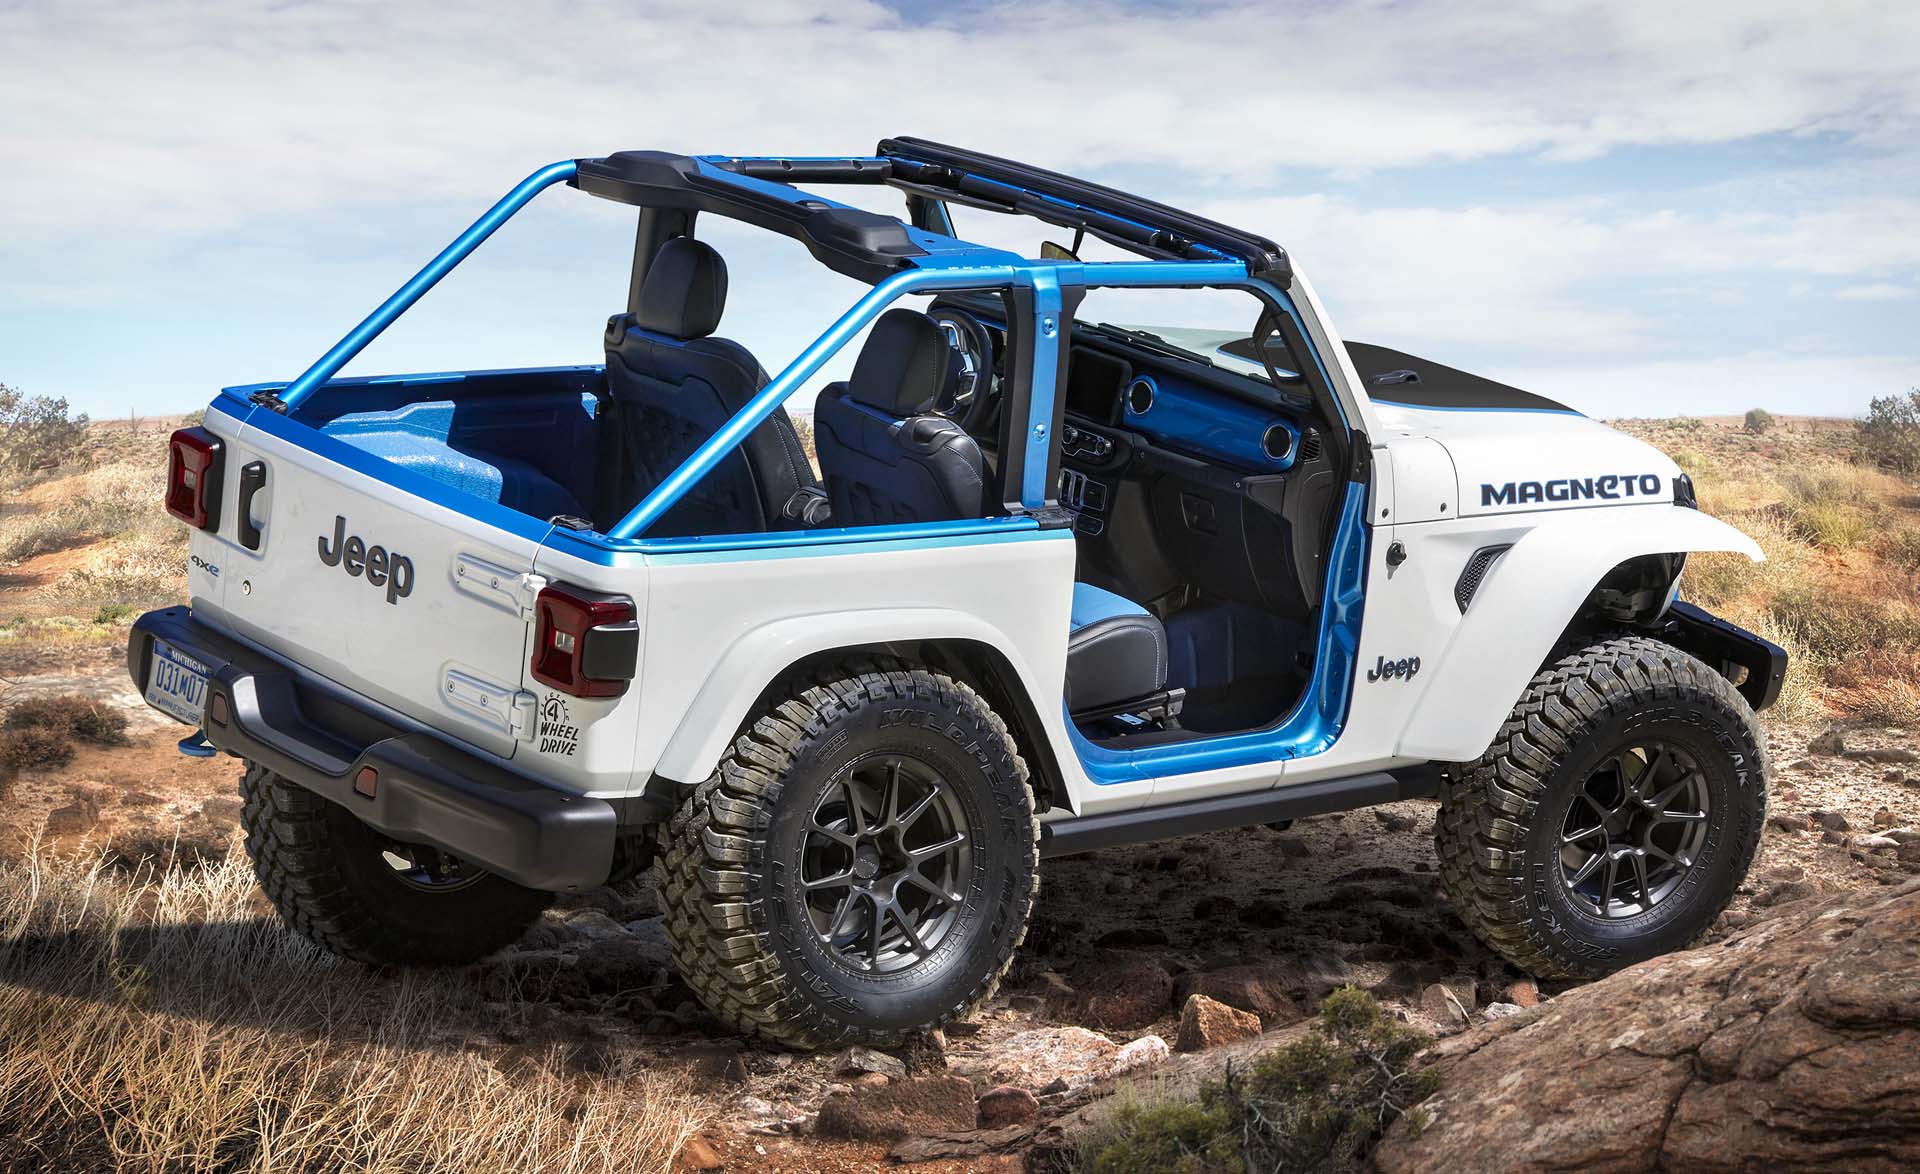 Fully electric Jeep Wrangler concept explores brand’s offroad EV identity